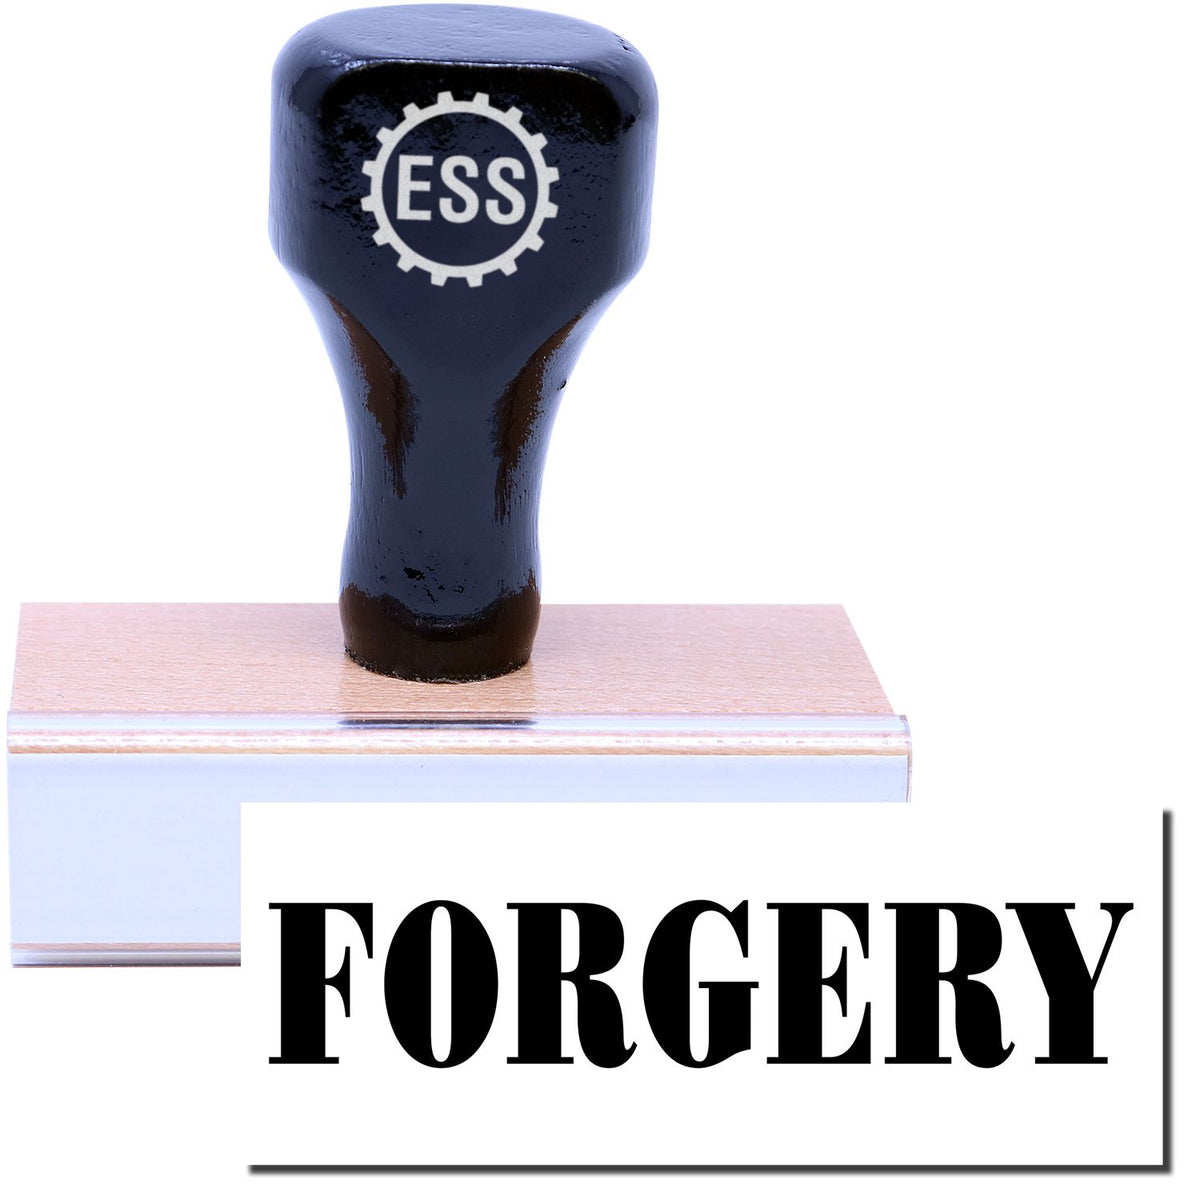 A stock office rubber stamp with a stamped image showing how the text &quot;FORGERY&quot; in a large font is displayed after stamping.